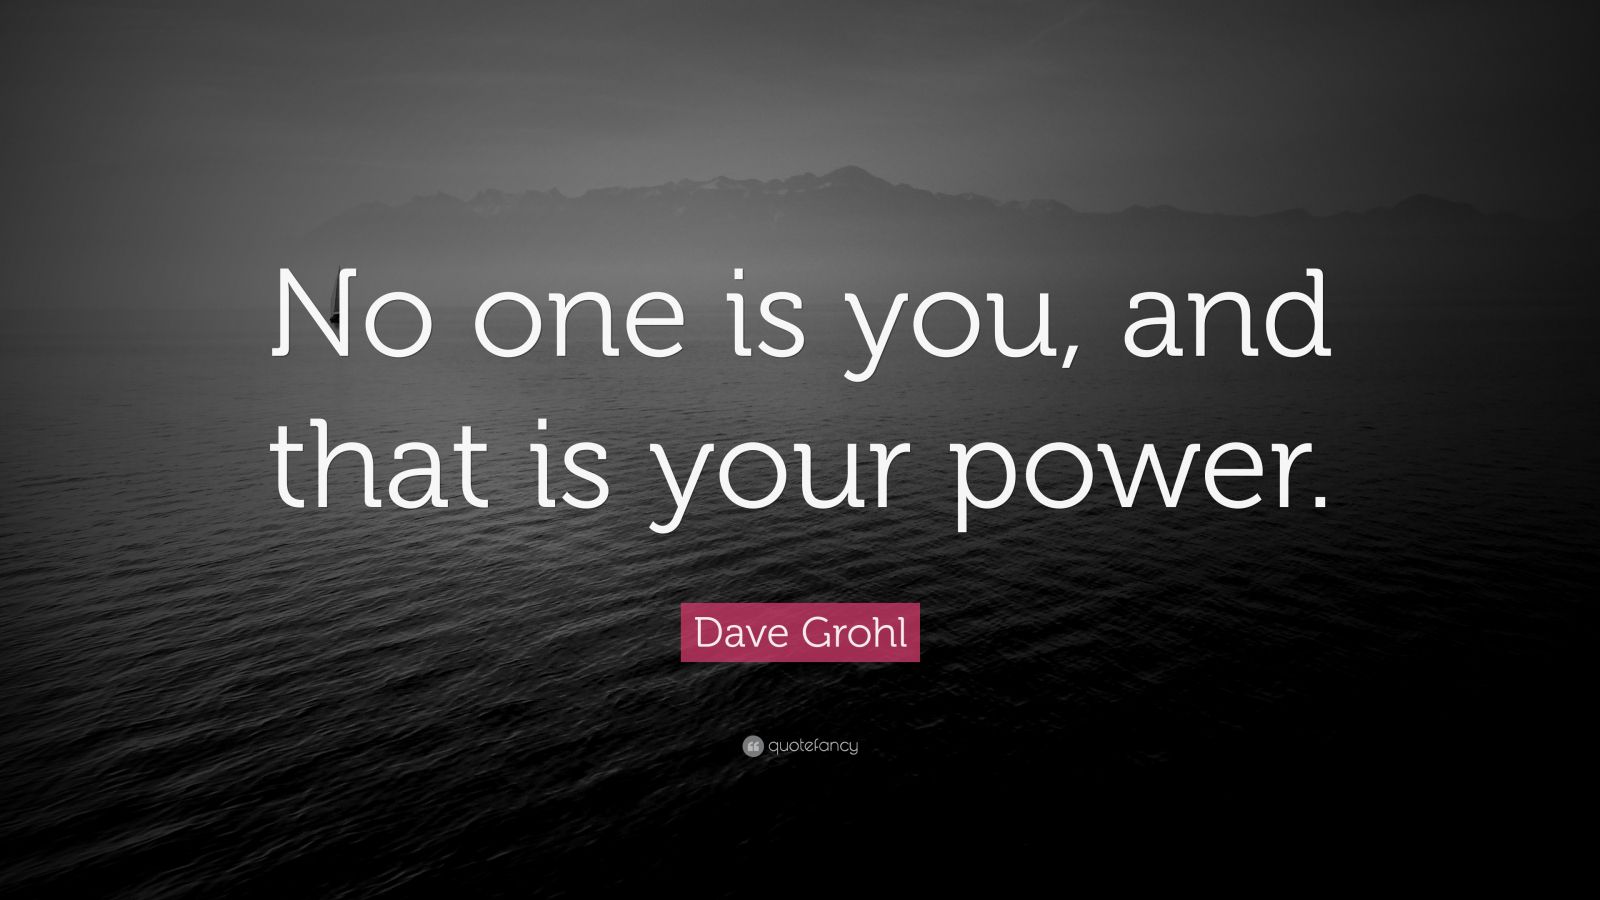 Dave Grohl Quote: “No one is you, and that is your power.” (12 ...